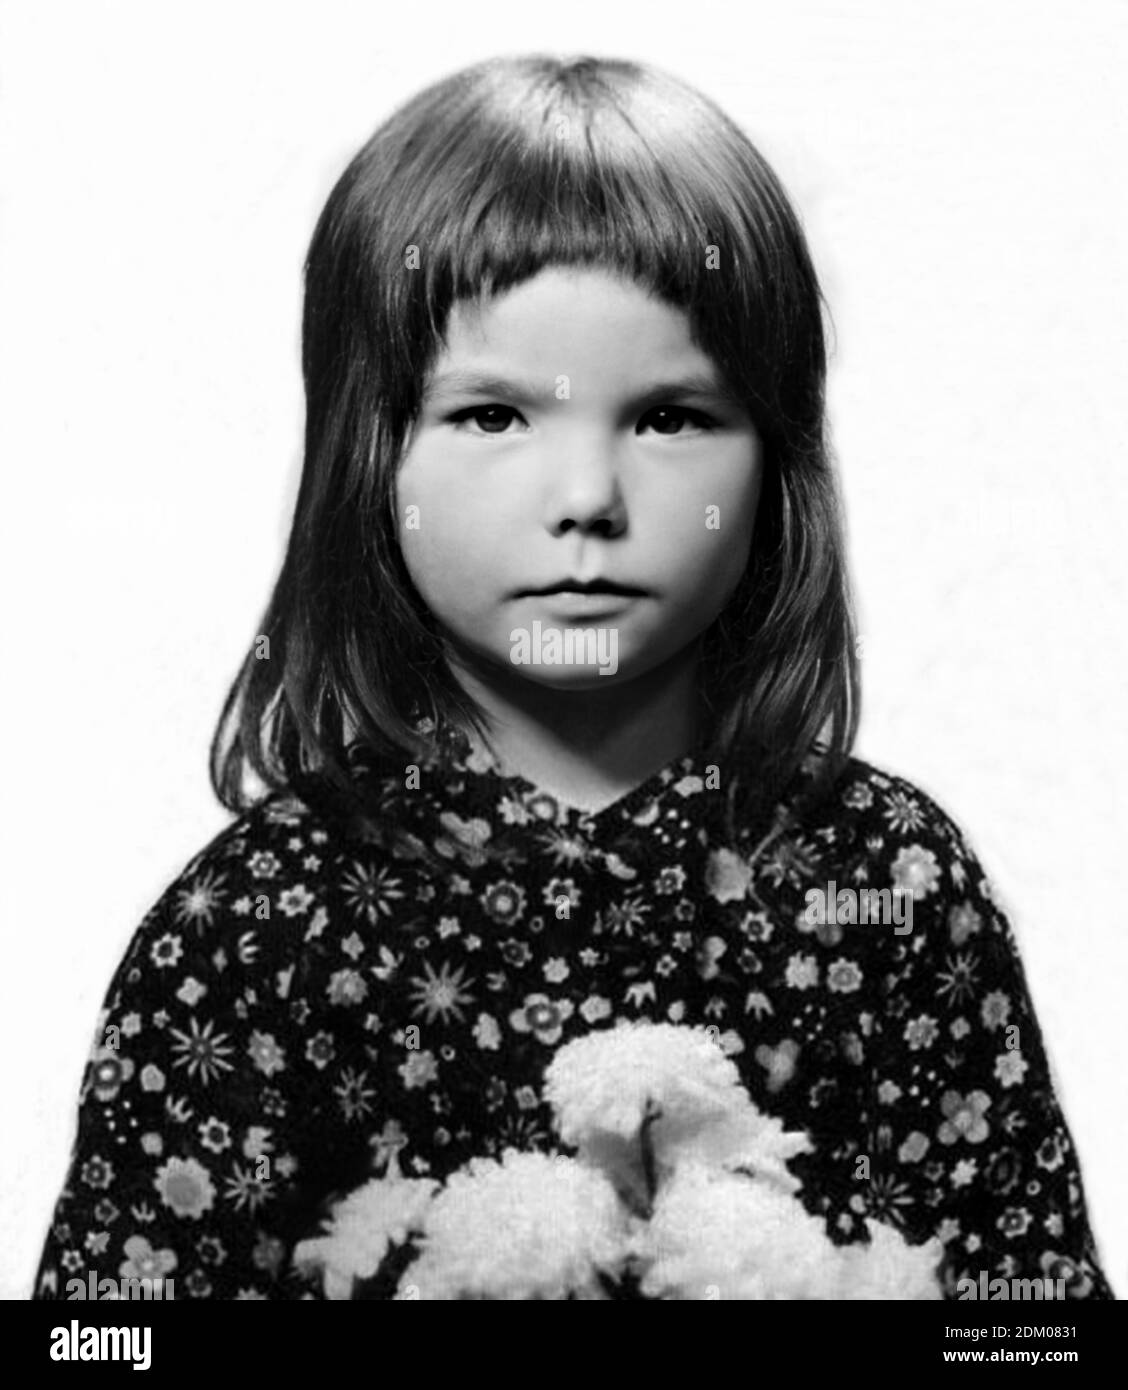 1970 ca, ICELAND : The celebrated icelander Pop singer and composer BJORK Björk Guðmundsdóttir ( born in 1965 ) when was a young girl aged 5 . Unknown photographer. - HISTORY - FOTO STORICHE - personalità da bambino bambini da giovane - personality personalities when was young - INFANZIA - CHILDHOOD - BAMBINO - BAMBINA - BABY - BAMBINI - CHILDREN - CHILD - POP MUSIC - MUSICA - cantante - COMPOSITORE --- ARCHIVIO GBB Stock Photo